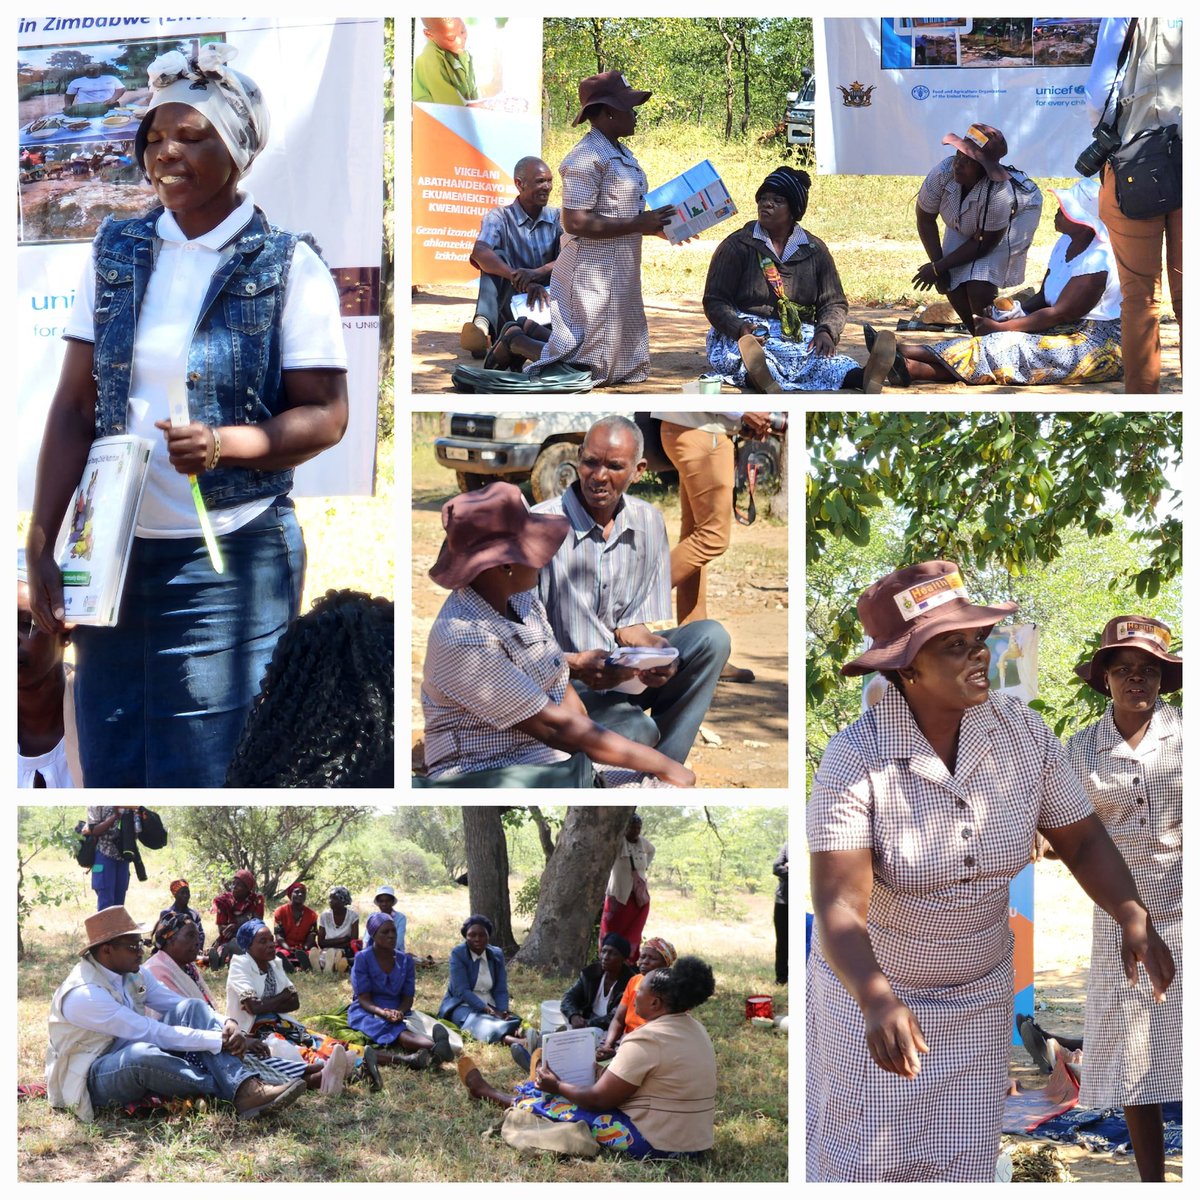 #ForEveryChild, a childhood.

Pleased to 👀 community care groups deploy #Drama, #Dance & #Dialogue to promote child care in 🇿🇼 . @UNICEFZIMBABWE supports the Gov't & partners to invest in #EarlyChildhoodDevelopment for maximum return on human capital dev. @FNCZimbabwe @MoHCCZim